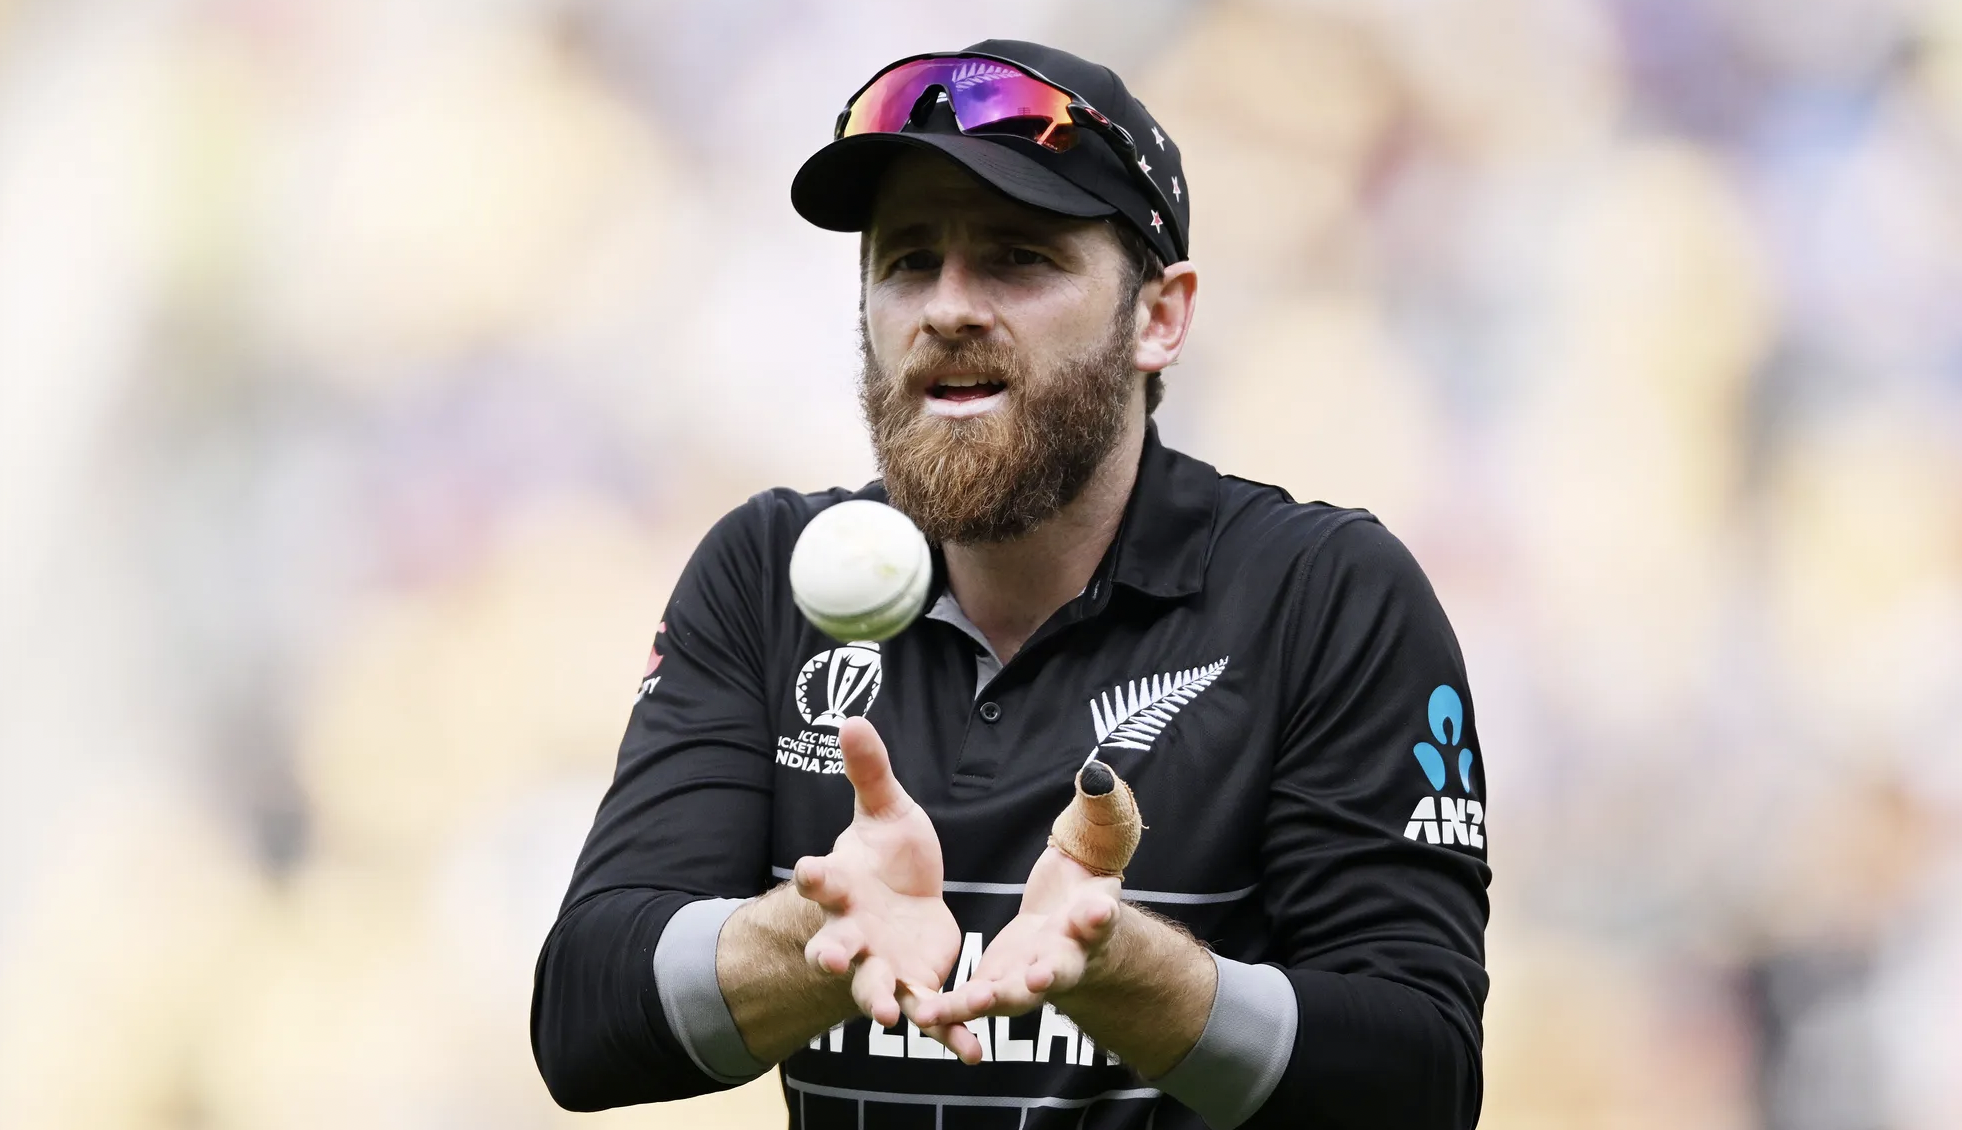 From ‘disheartening’ injuries to guiding Blackcaps to the semifinals – Williamson’s Journey of Trials